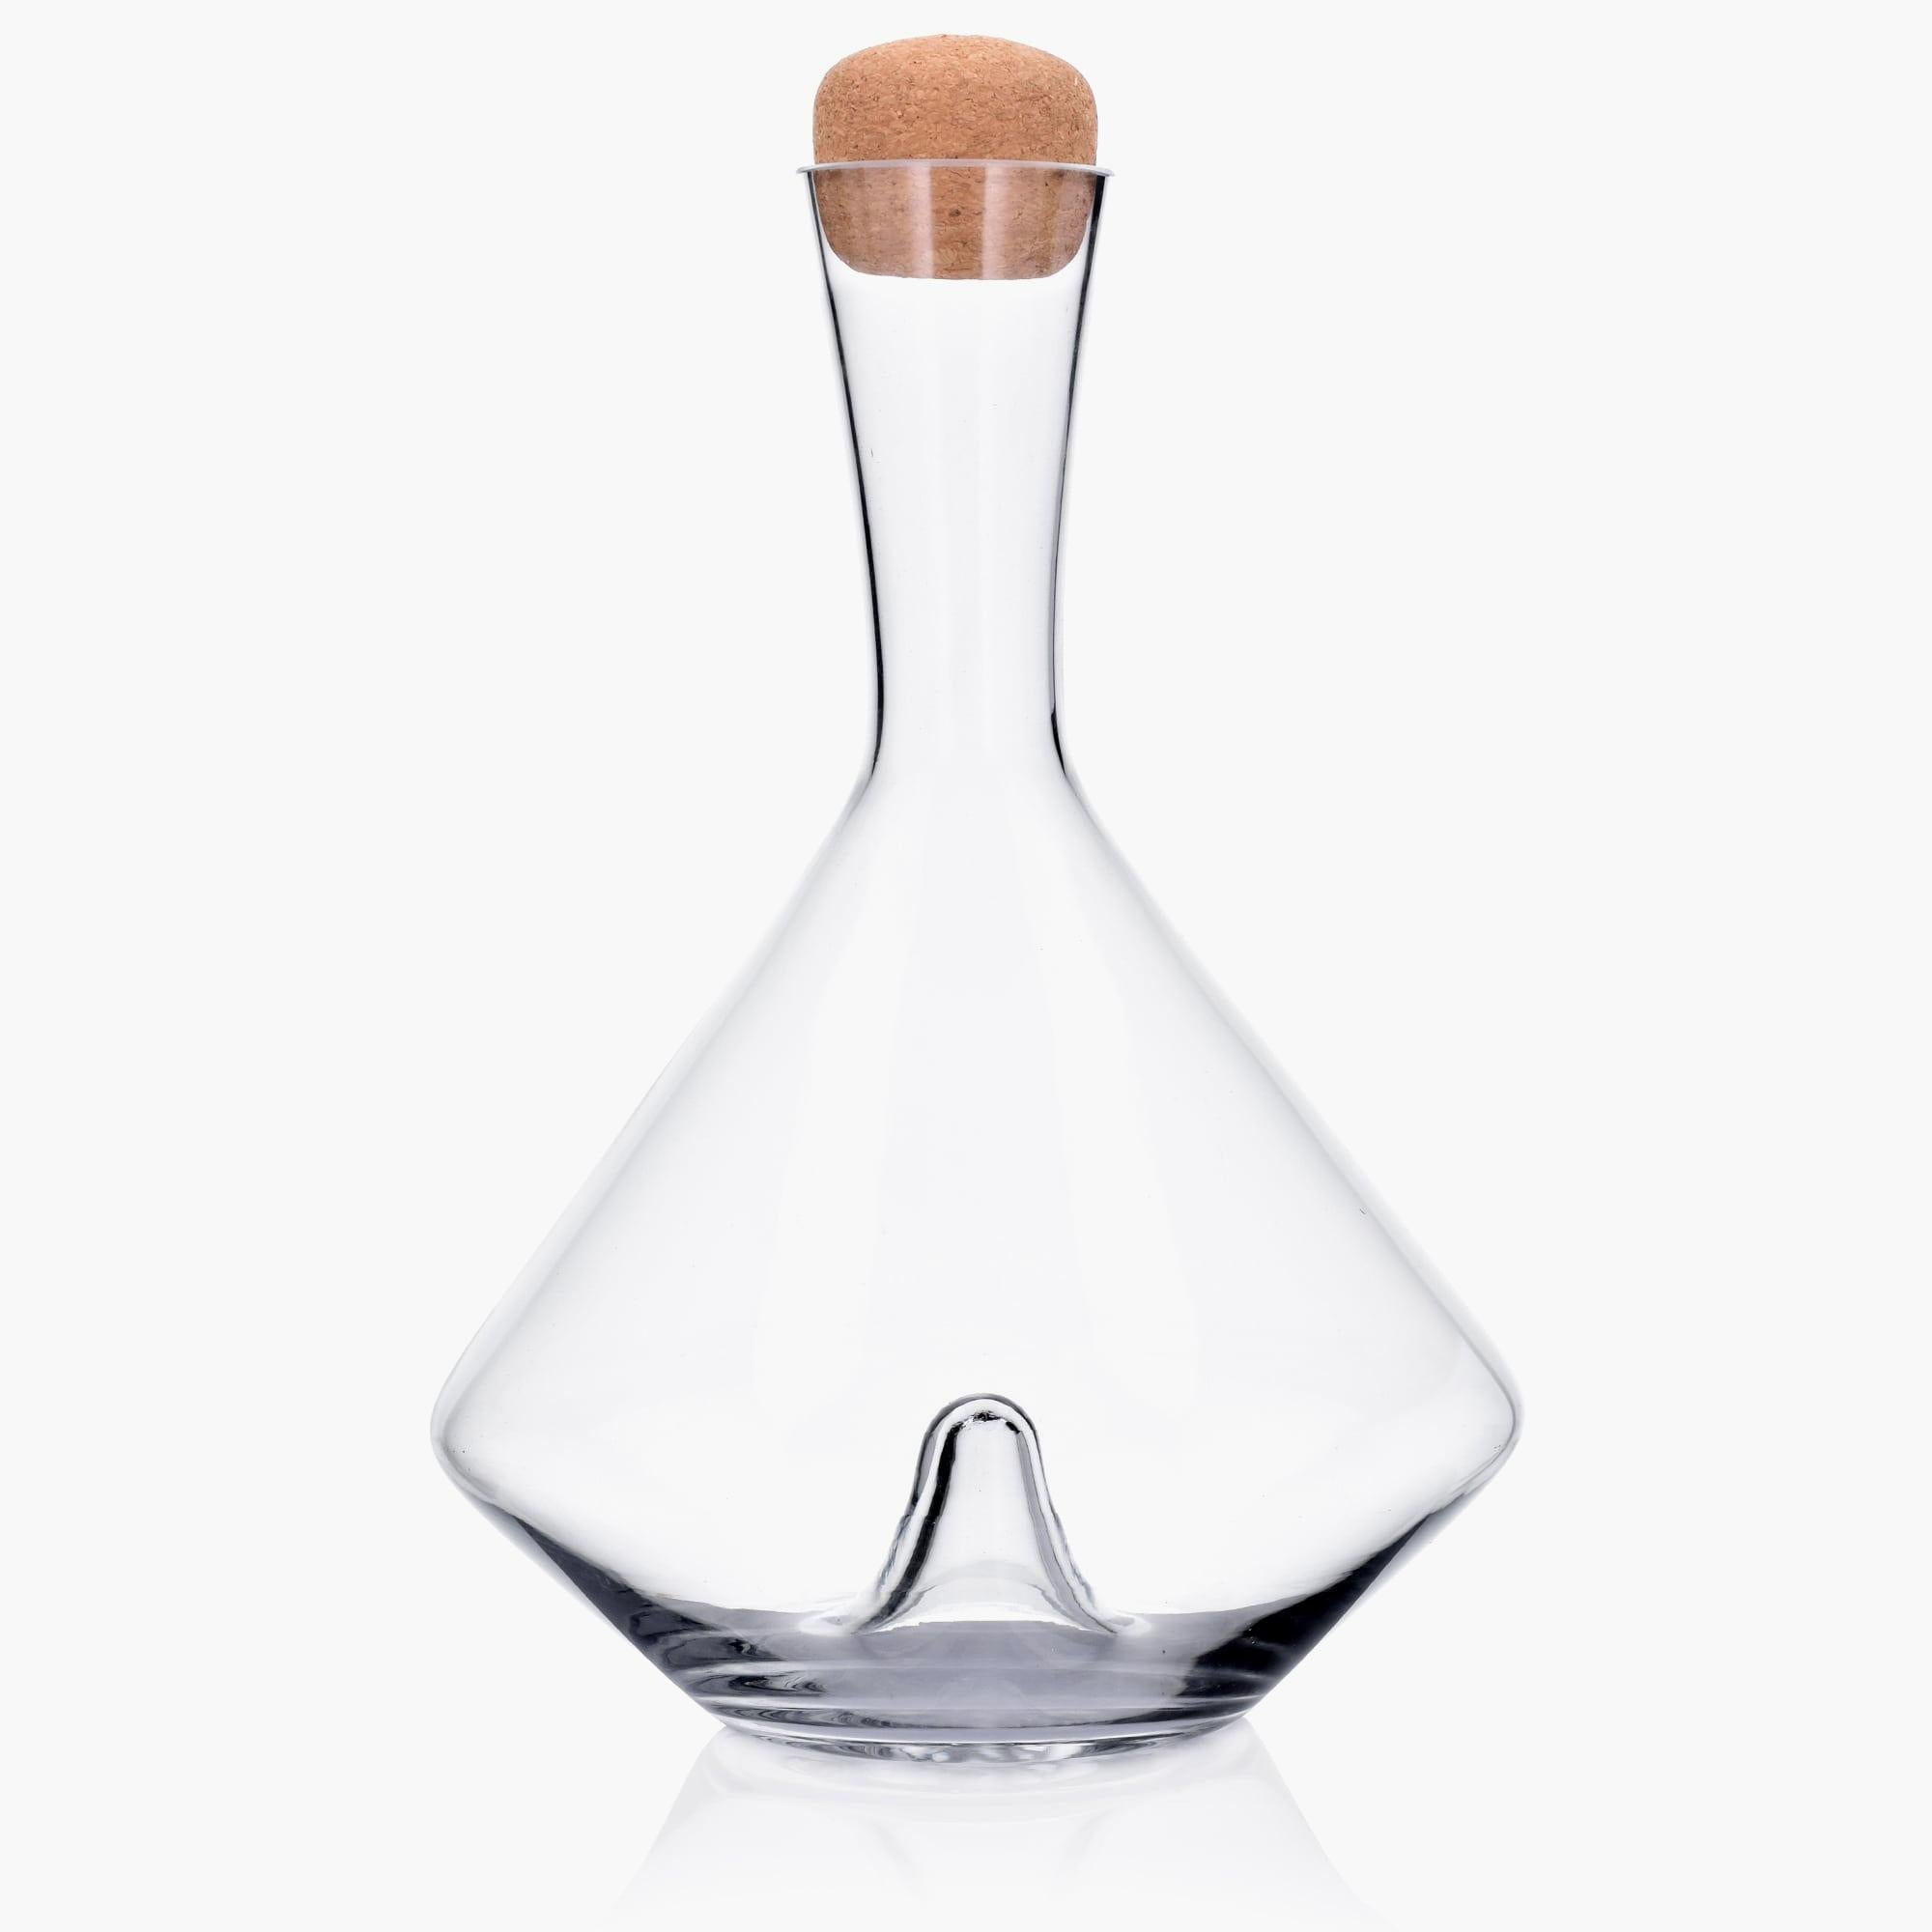 1.5-Liter Glass Decanter with Cork Stopper